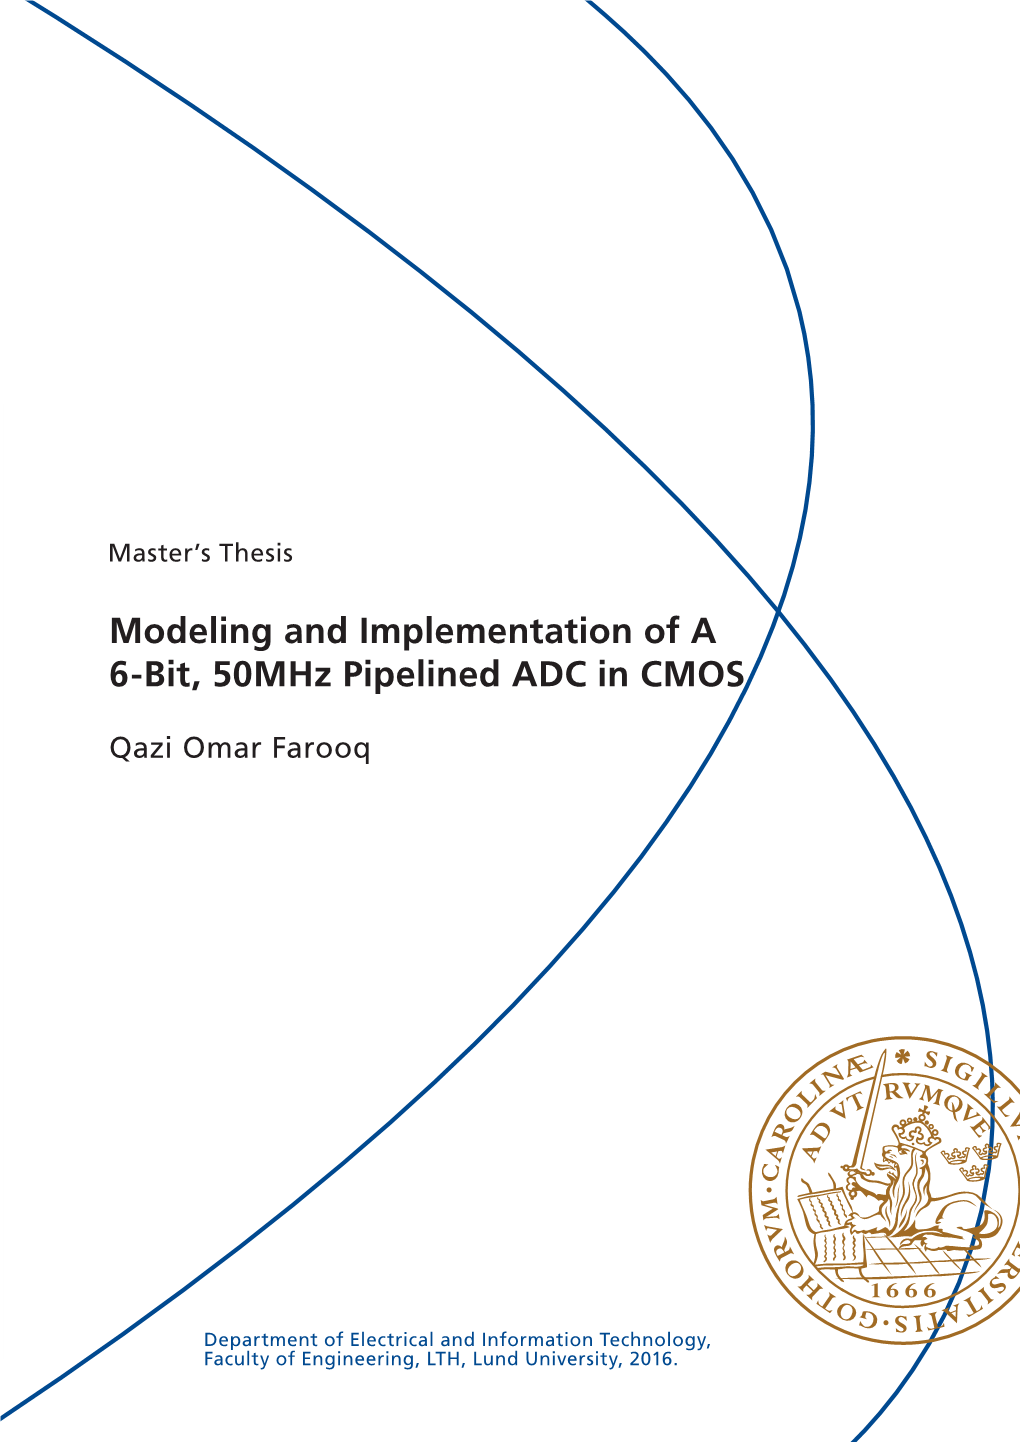 Modeling and Implementation of a 6-Bit, 50Mhz Pipelined ADC in CMOS